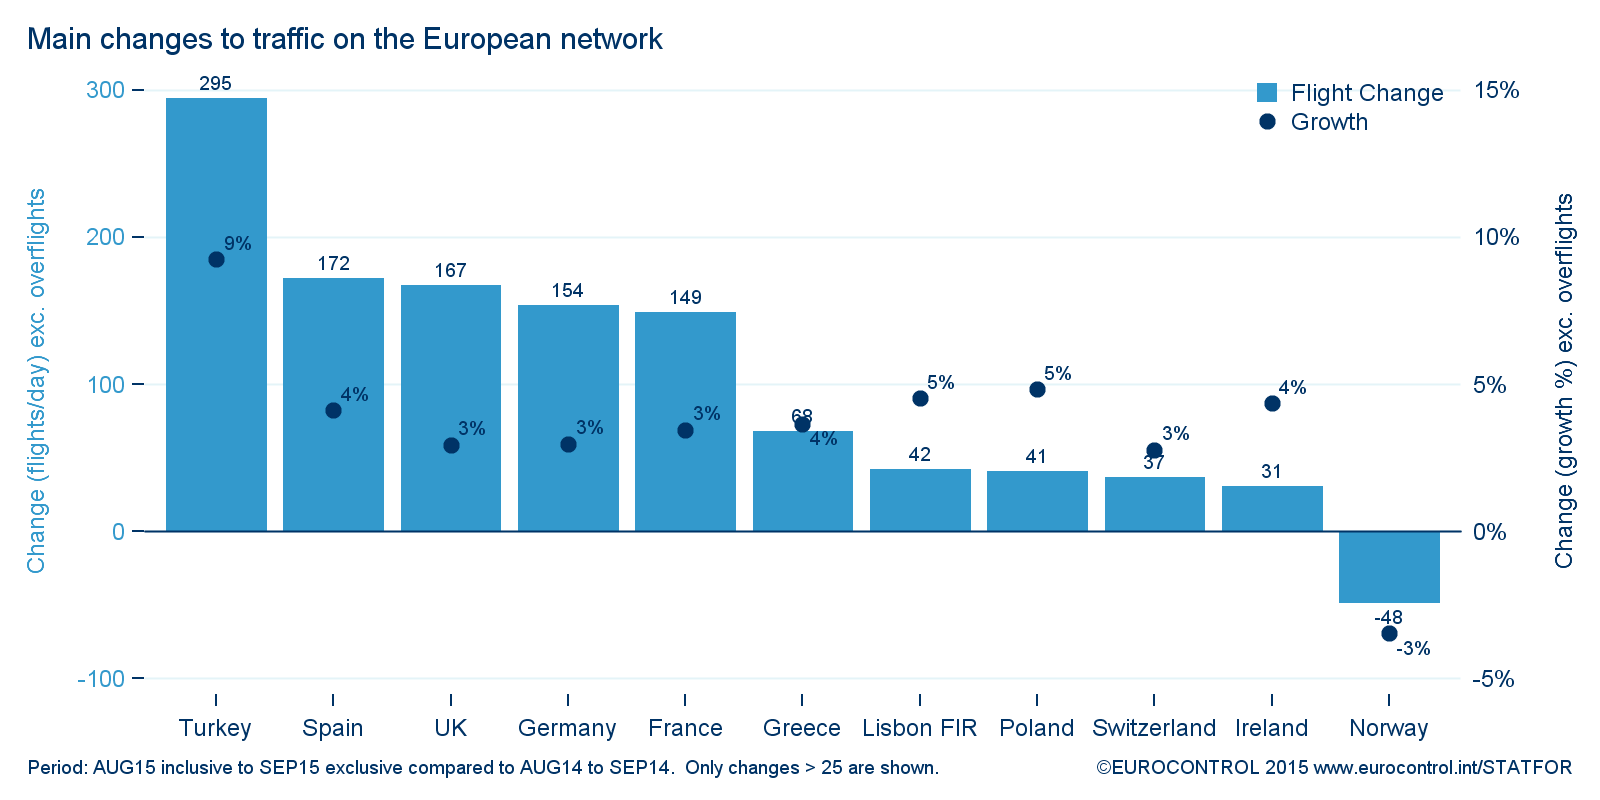 Figure 1: Monthly European Traffic and Forecast (Feb15). Figure 2: Main changes to traffic on the European network in August.